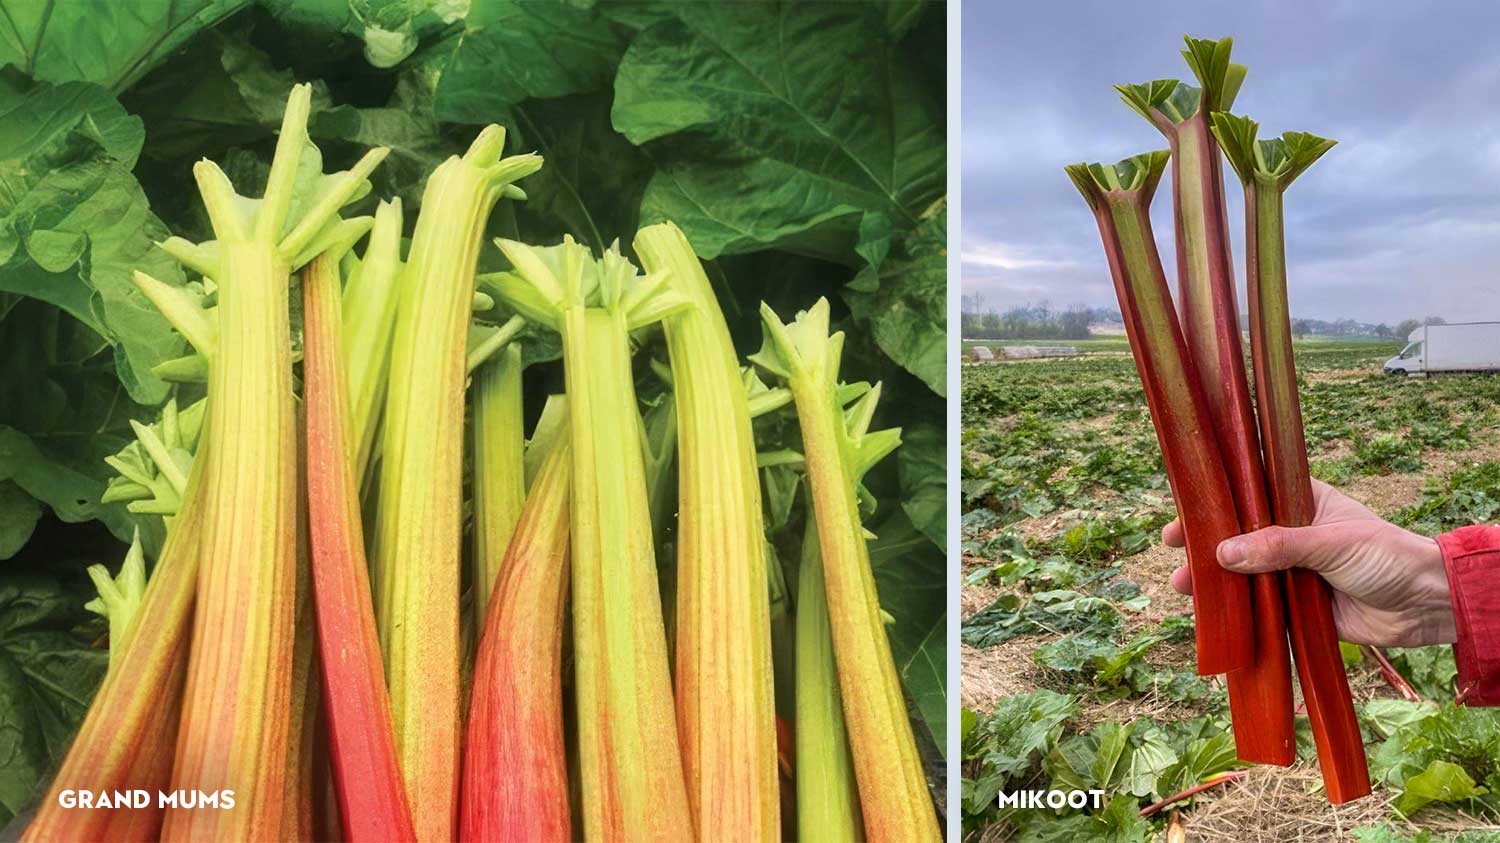 French_Rhubarb_Le_Domaine_de_la_Source_Grand_Mums_Mikoot_Rhubarb_from_France_in_Dubai_WISK_UAE.jpg